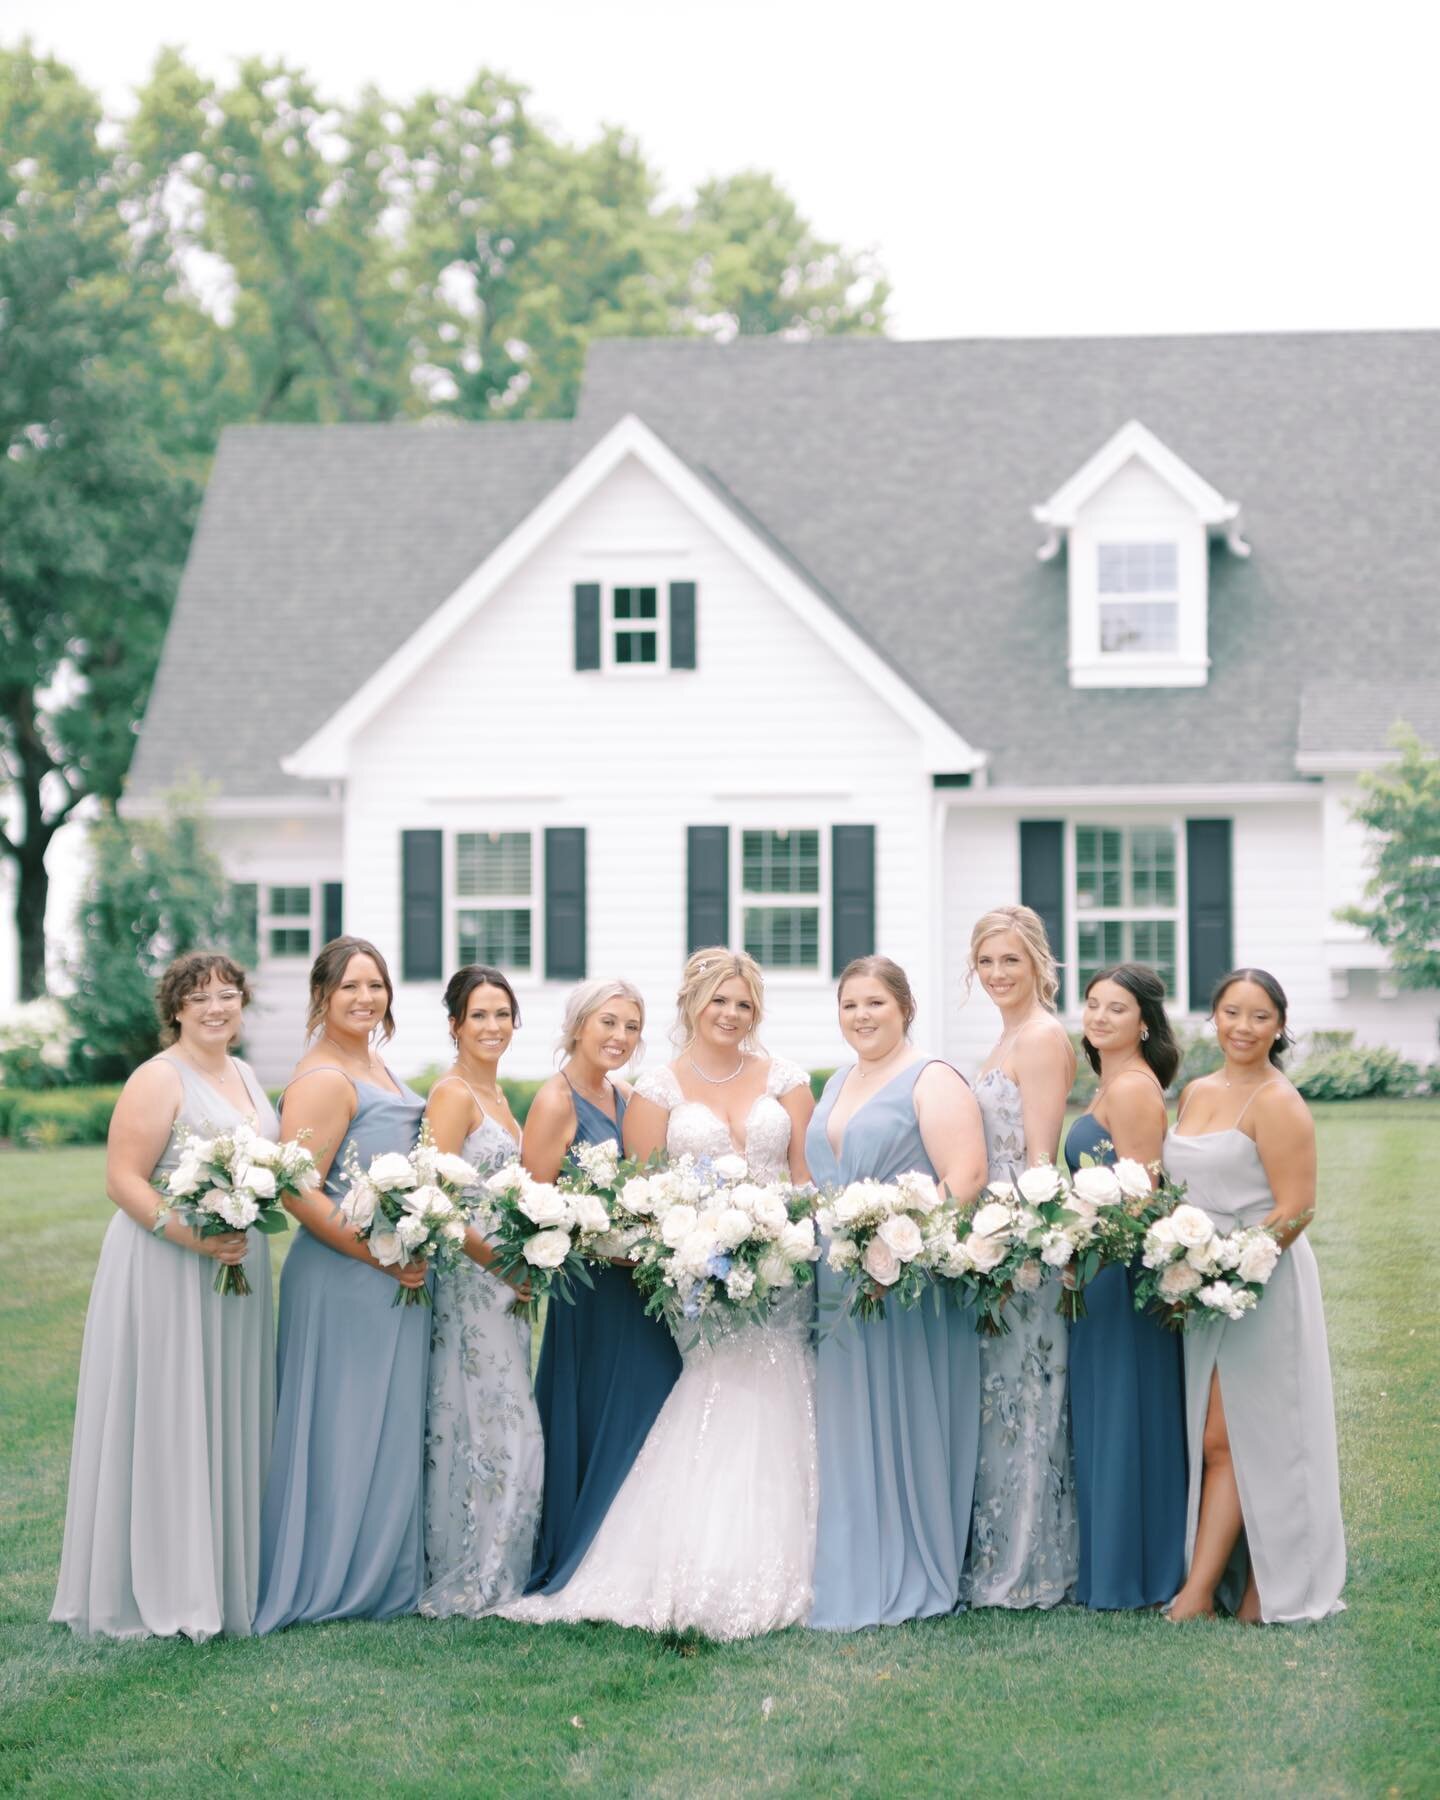 Favorite things: Blending and mixing cohesive and complementary colors by way of the bridesmaid gowns! I love a good mix and match over here, especially when I see it repeated throughout the elements and details of the day!

Couple: @lauren_medlock98